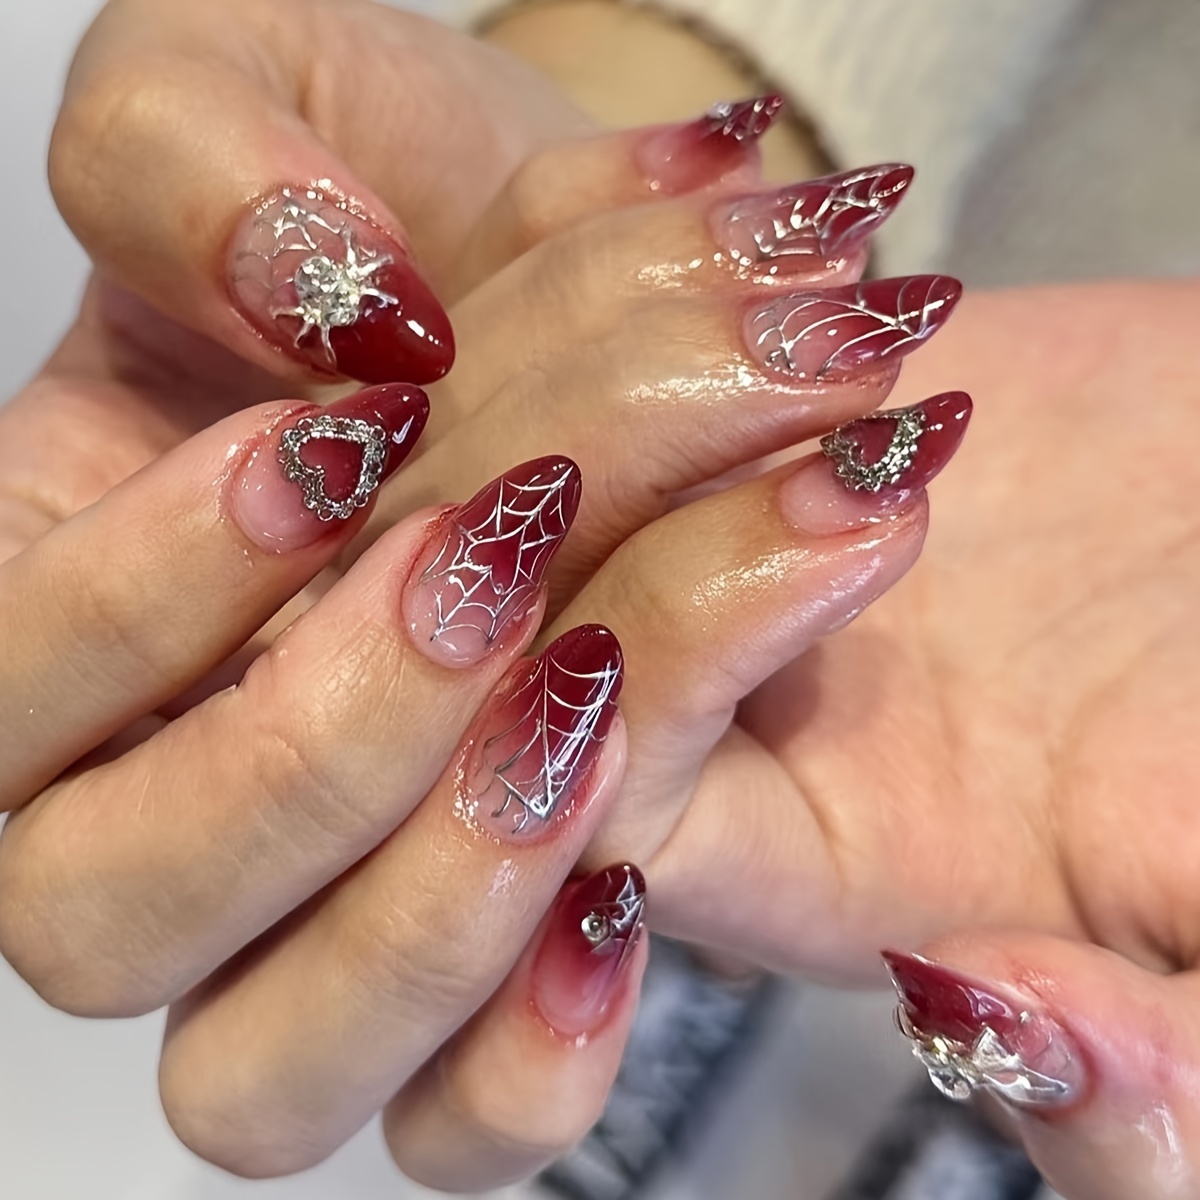 

Glossy Red Gradient Press On Nails, Fake Nails With Spider Web And Rhinestone Heart Design, Sweet Cool False Nails For Women Girls